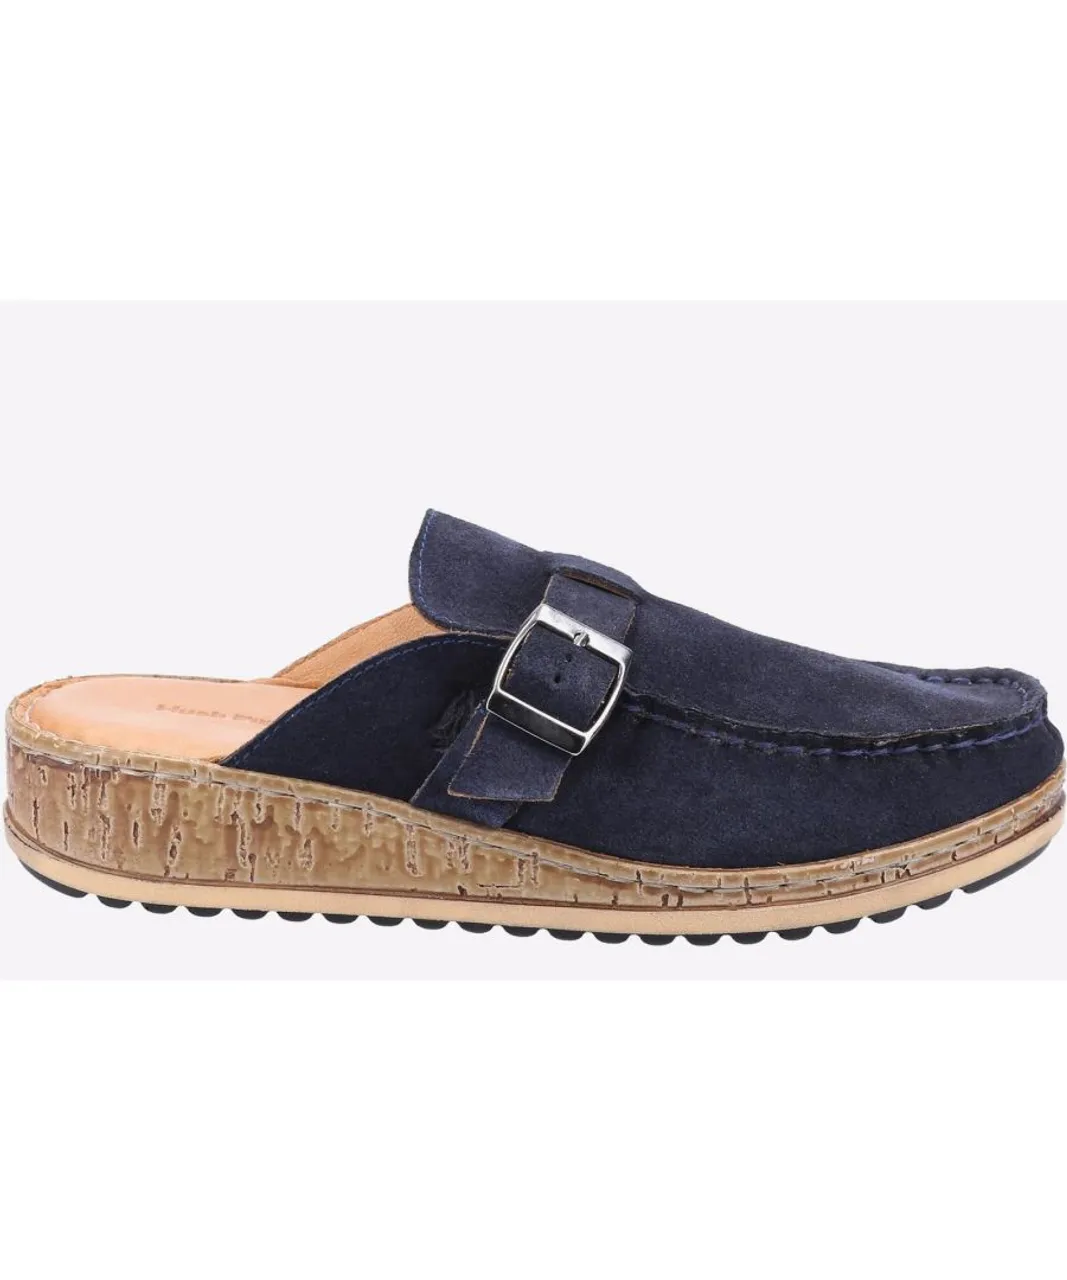 Hush Puppies Sorcha Mule MEMORY FOAM Sandal Womens - Navy Leather (archived)